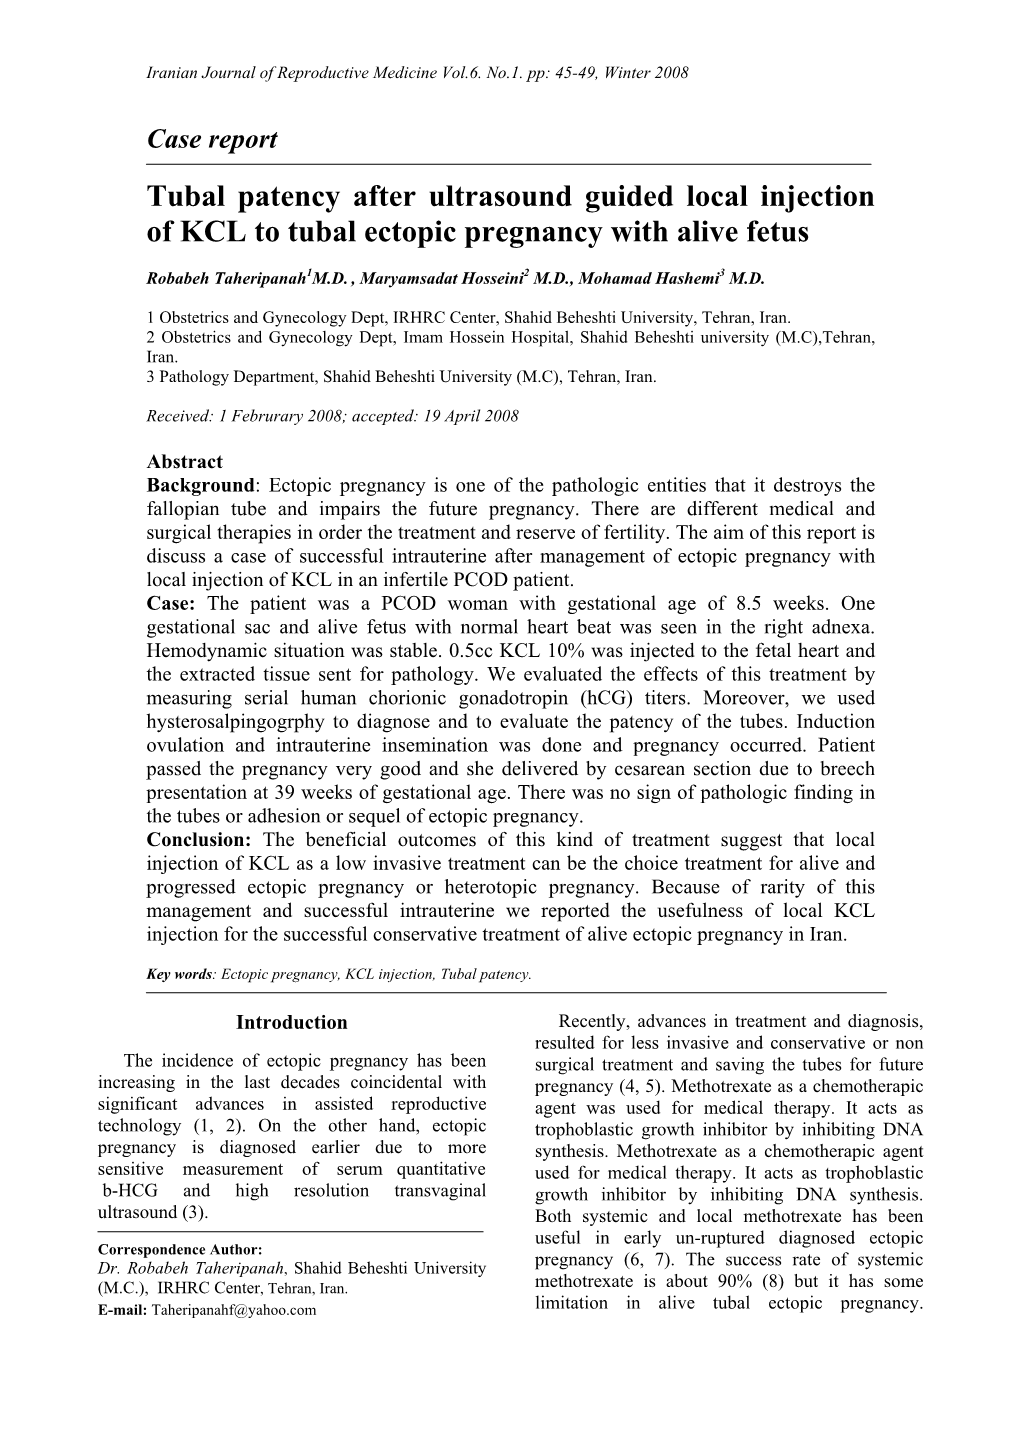 Tubal Patency After Ultrasound Guided Local Injection of KCL to Tubal Ectopic Pregnancy with Alive Fetus